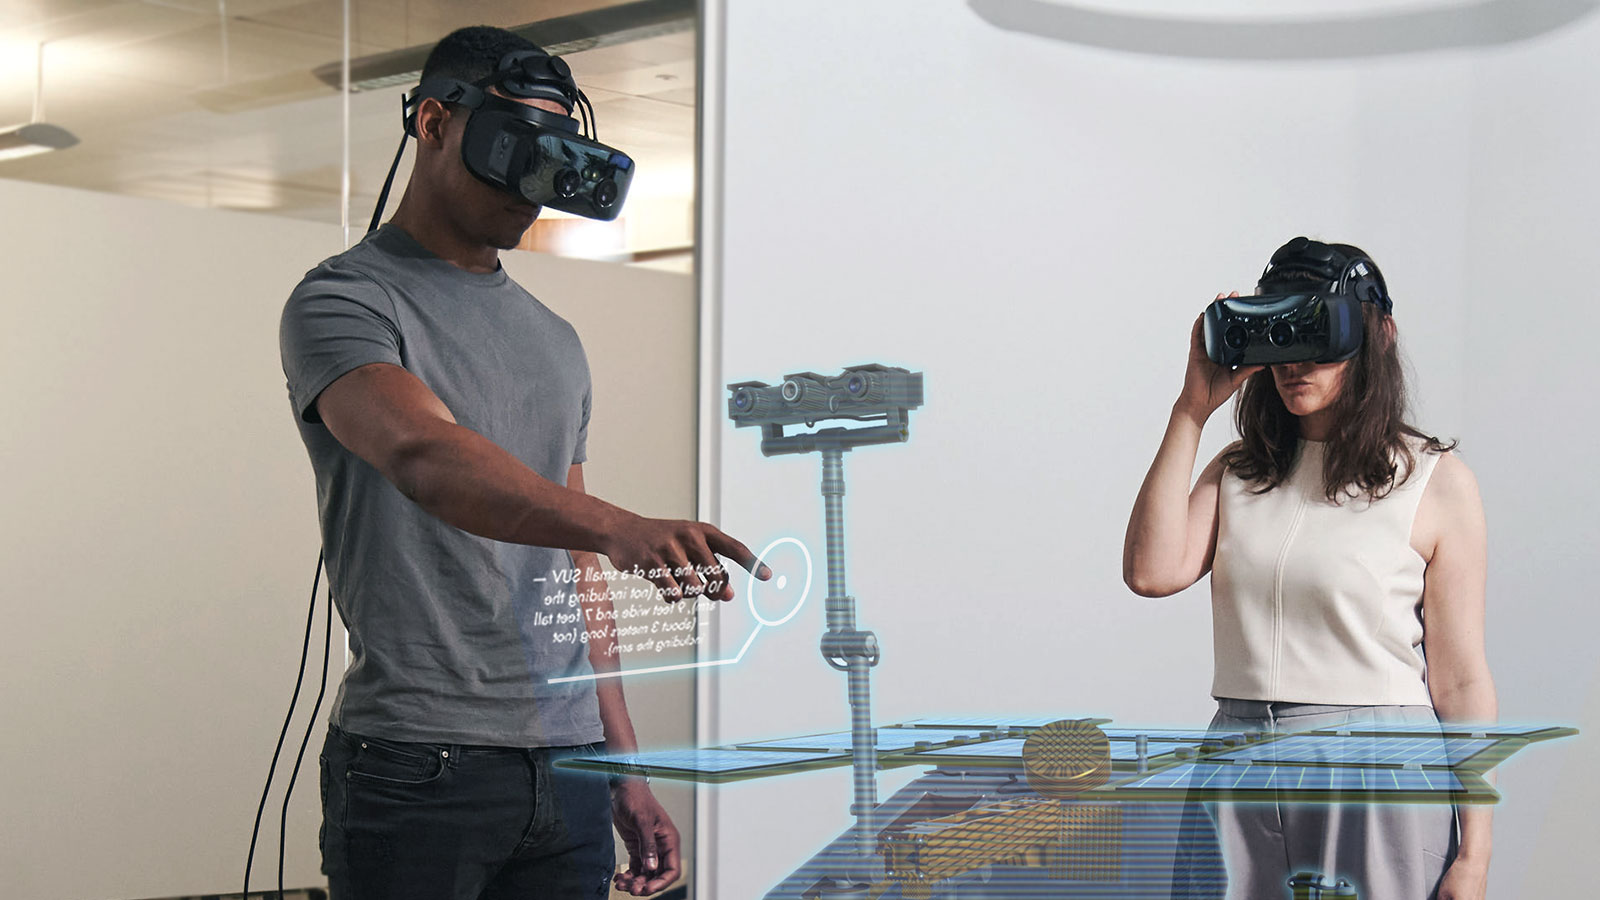 Two people wearing Varjo headset using Ultraleap hand tracking with Gemini